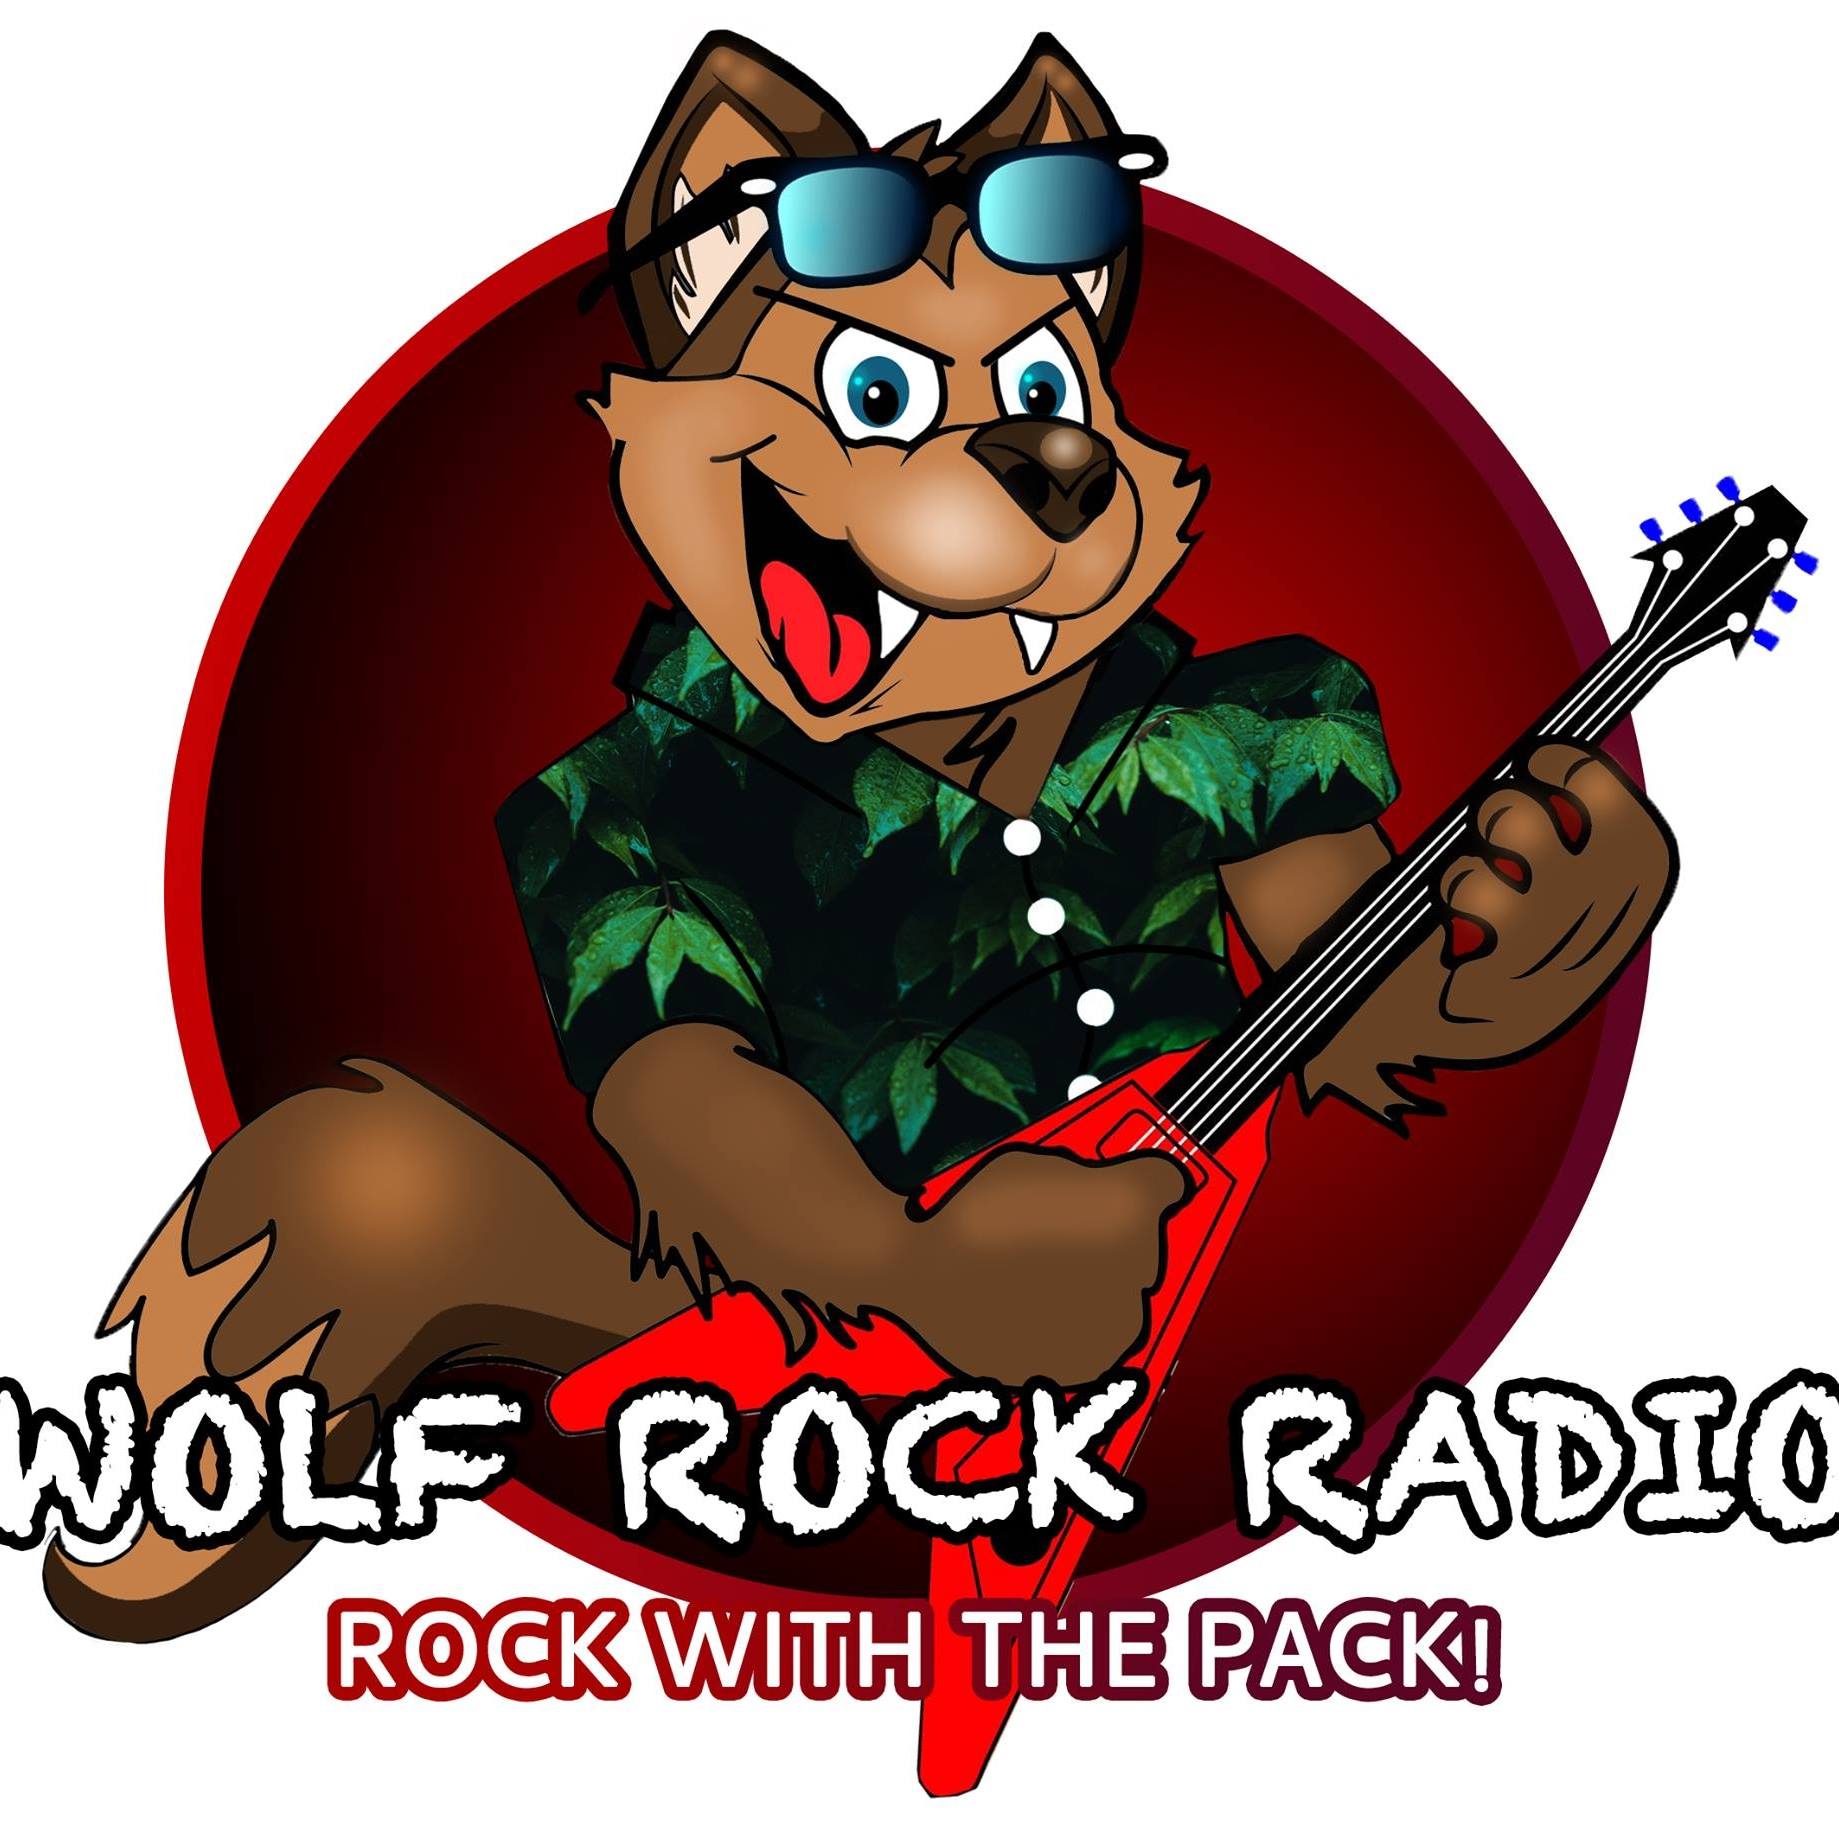 Art for Serena Stevens by WOLFROCK RADIO